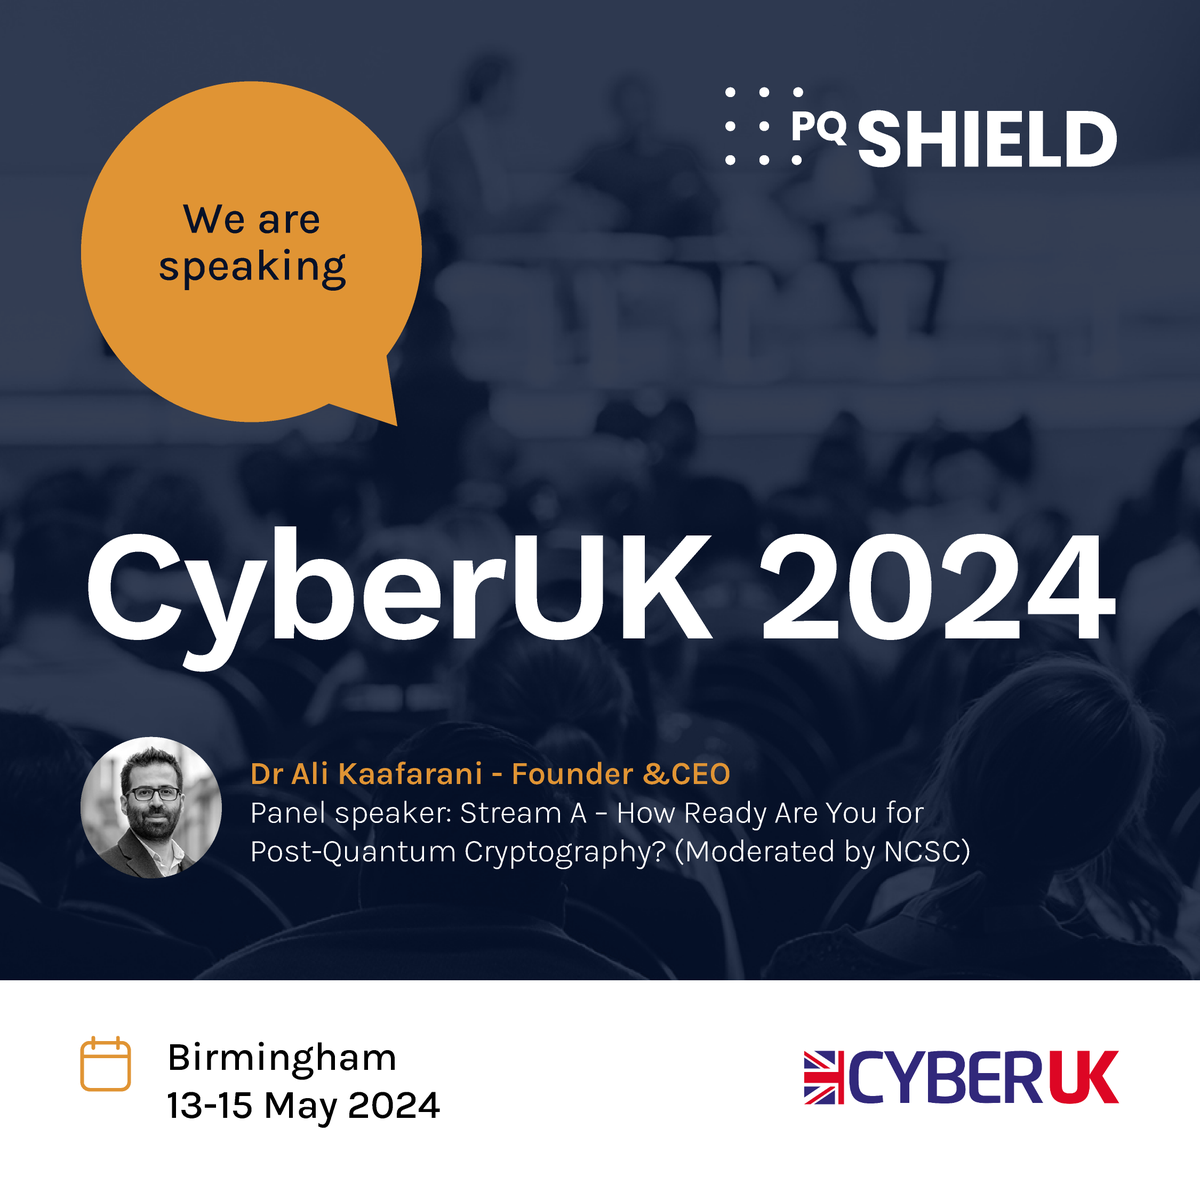 Our CEO and Founder Dr Ali Kaafarani will be speaking at CyberUK 2024 in Birmingham on the 13-15 May on - 'How Ready Are You for Post-Quantum Cryptography?' (Moderated by the NCSC). #cryptography #cybersecurity